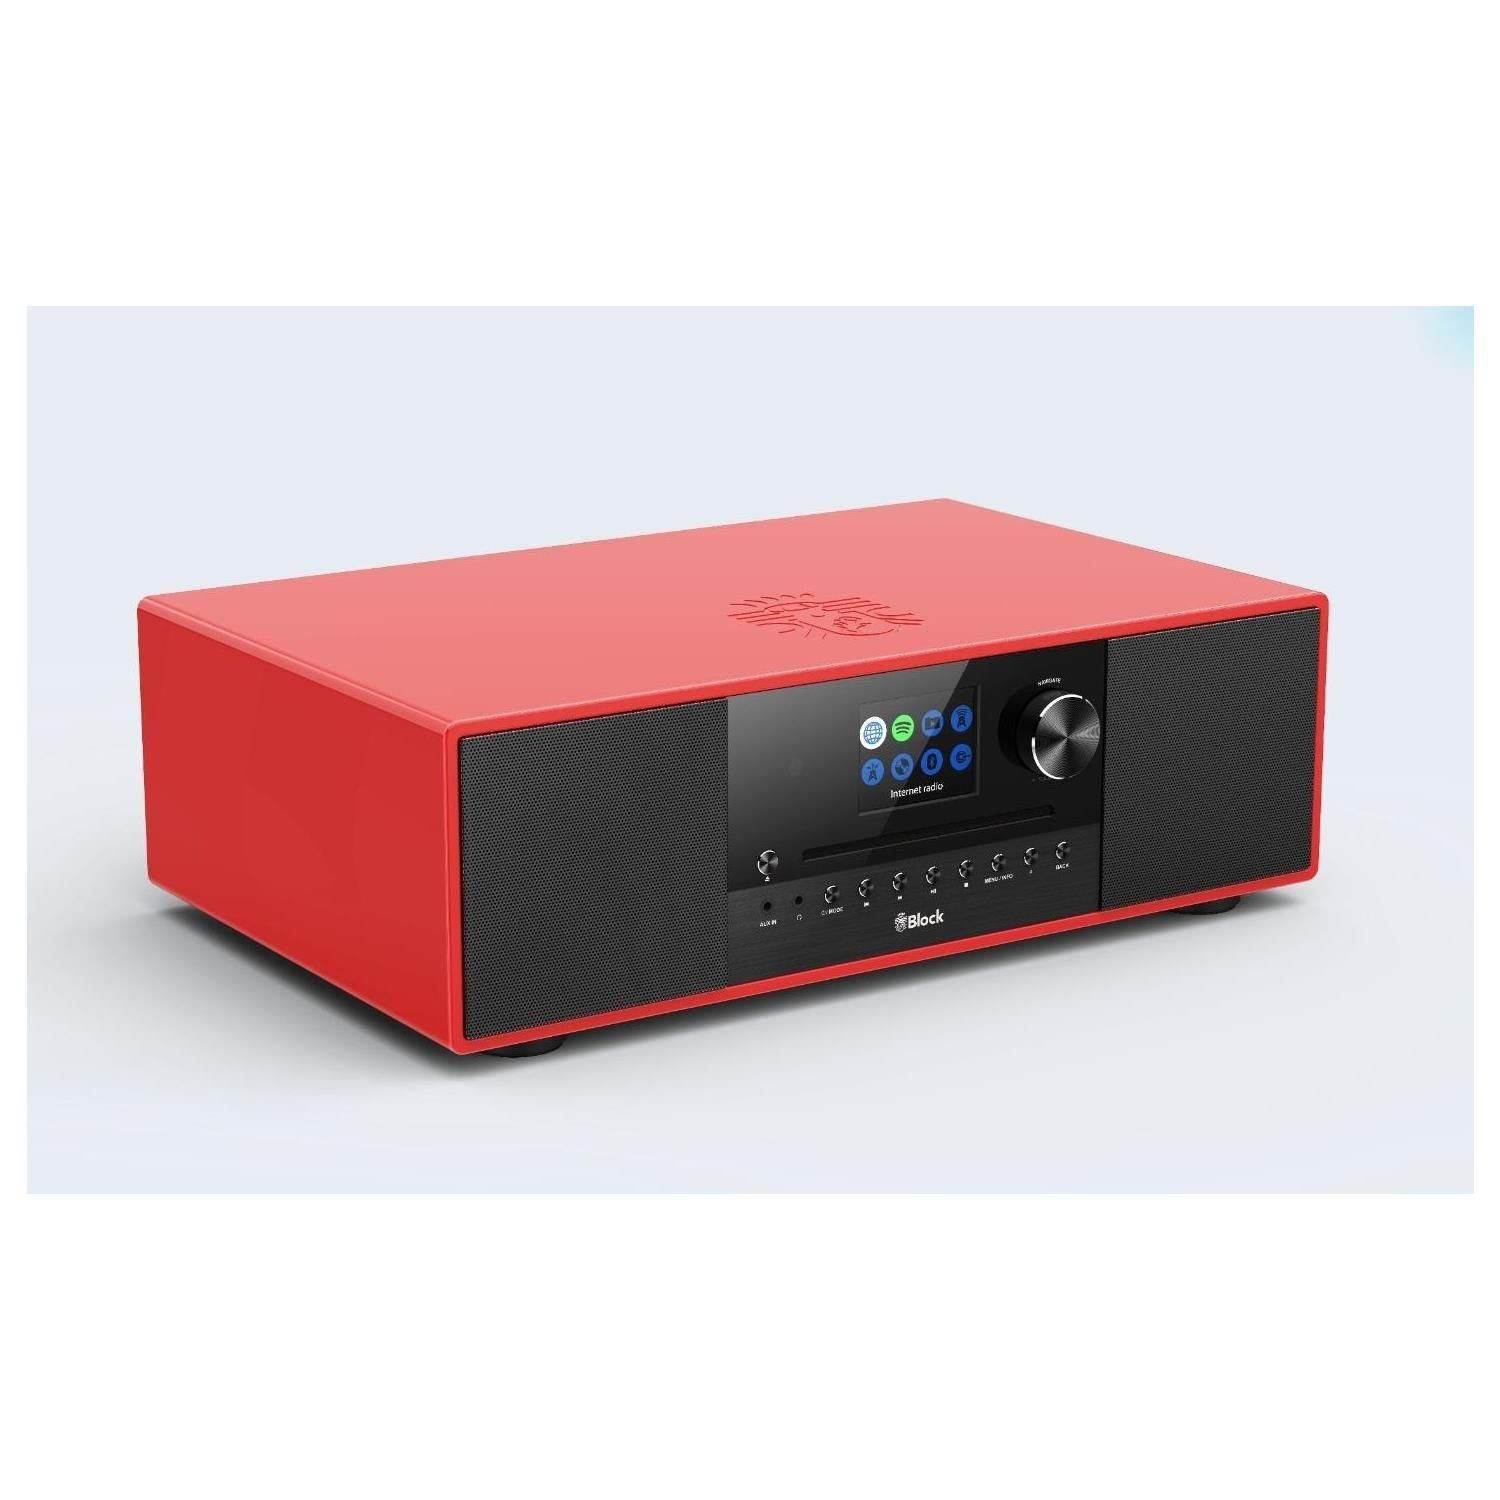 (Farbdisplay,Bluetooth, (DAB) Block DAB+ Digitalradio Internetradio Digitalradio CD Display UKW USB, rot Connected-Room) MKII dimmbares Systemfernbedienung, SR-200